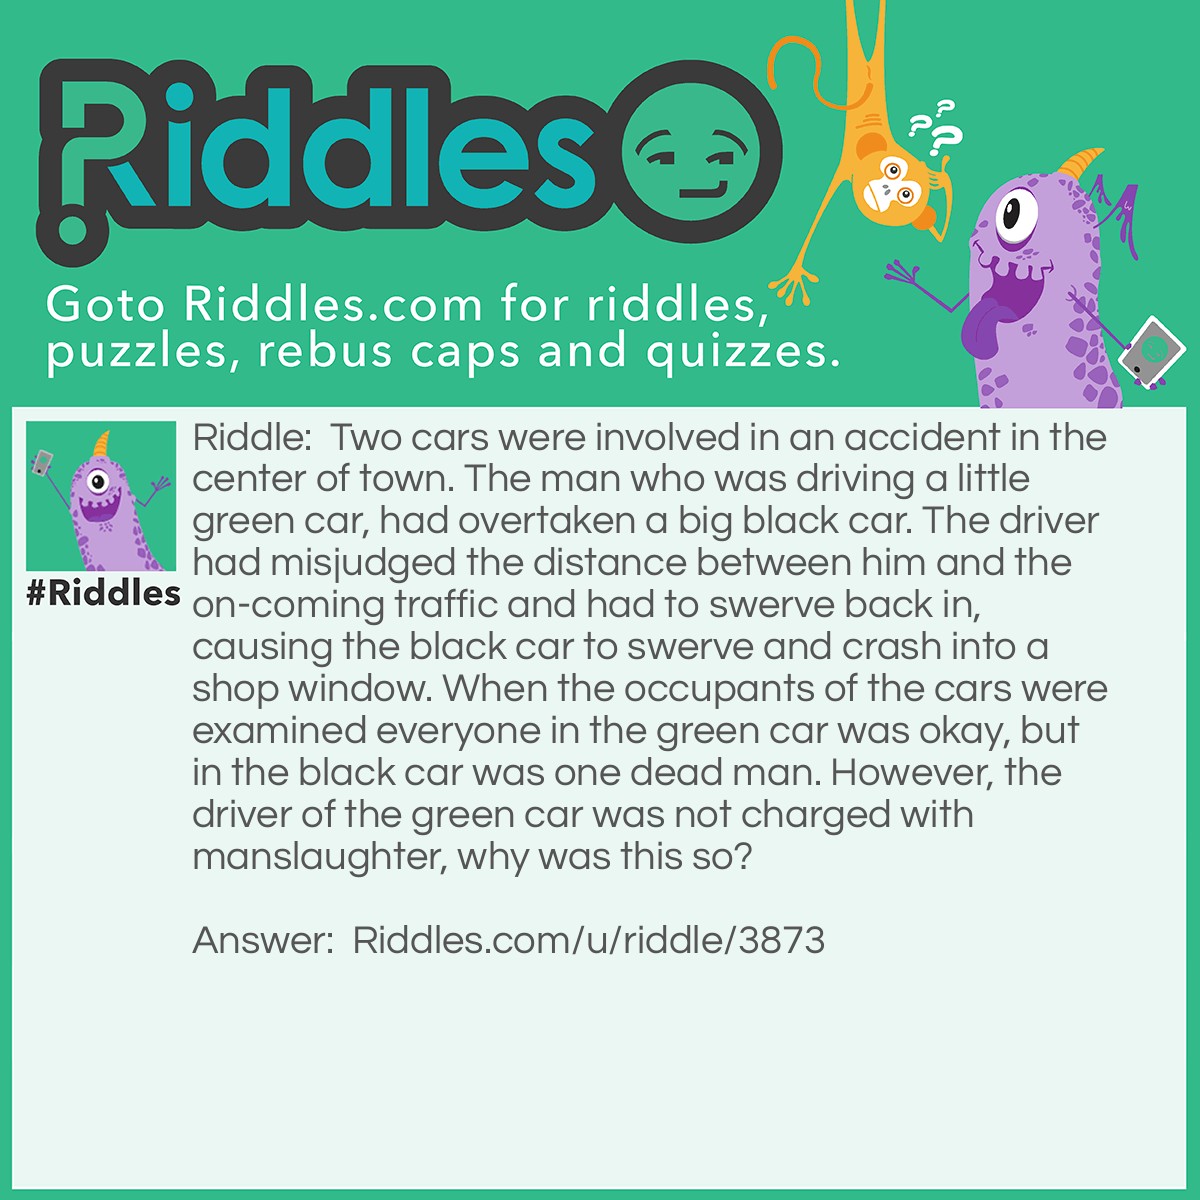 Riddle: Two cars were involved in an accident in the center of town. The man who was driving a little green car, had overtaken a big black car. The driver had misjudged the distance between him and the on-coming traffic and had to swerve back in, causing the black car to swerve and crash into a shop window. When the occupants of the cars were examined everyone in the green car was okay, but in the black car was one dead man. However, the driver of the green car was not charged with manslaughter, why was this so? Answer: The black car was a hearse and was on its way to a funeral.